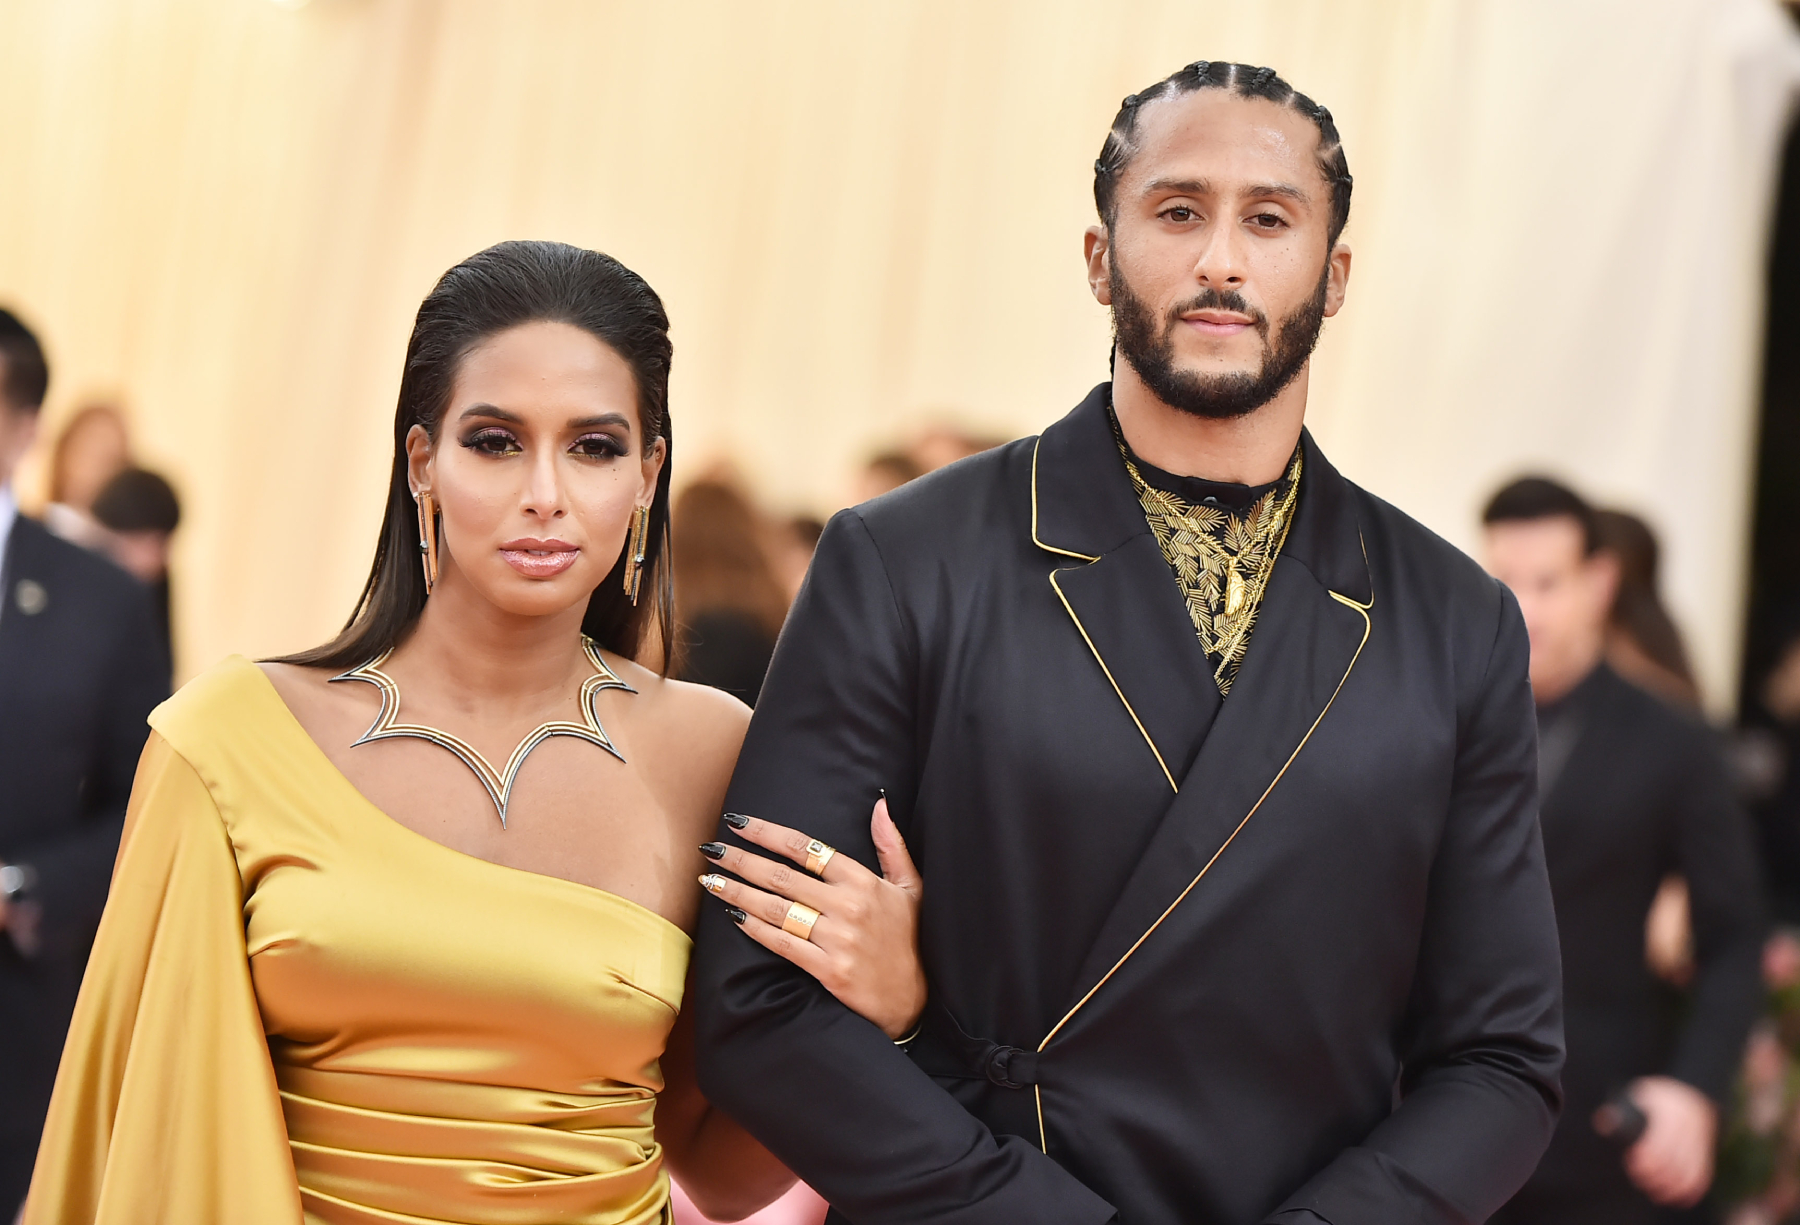 Colin Kaepernick made headlines when he took a knee. He and his girlfriend Nessa, though, began fighting racial inequality way before that.